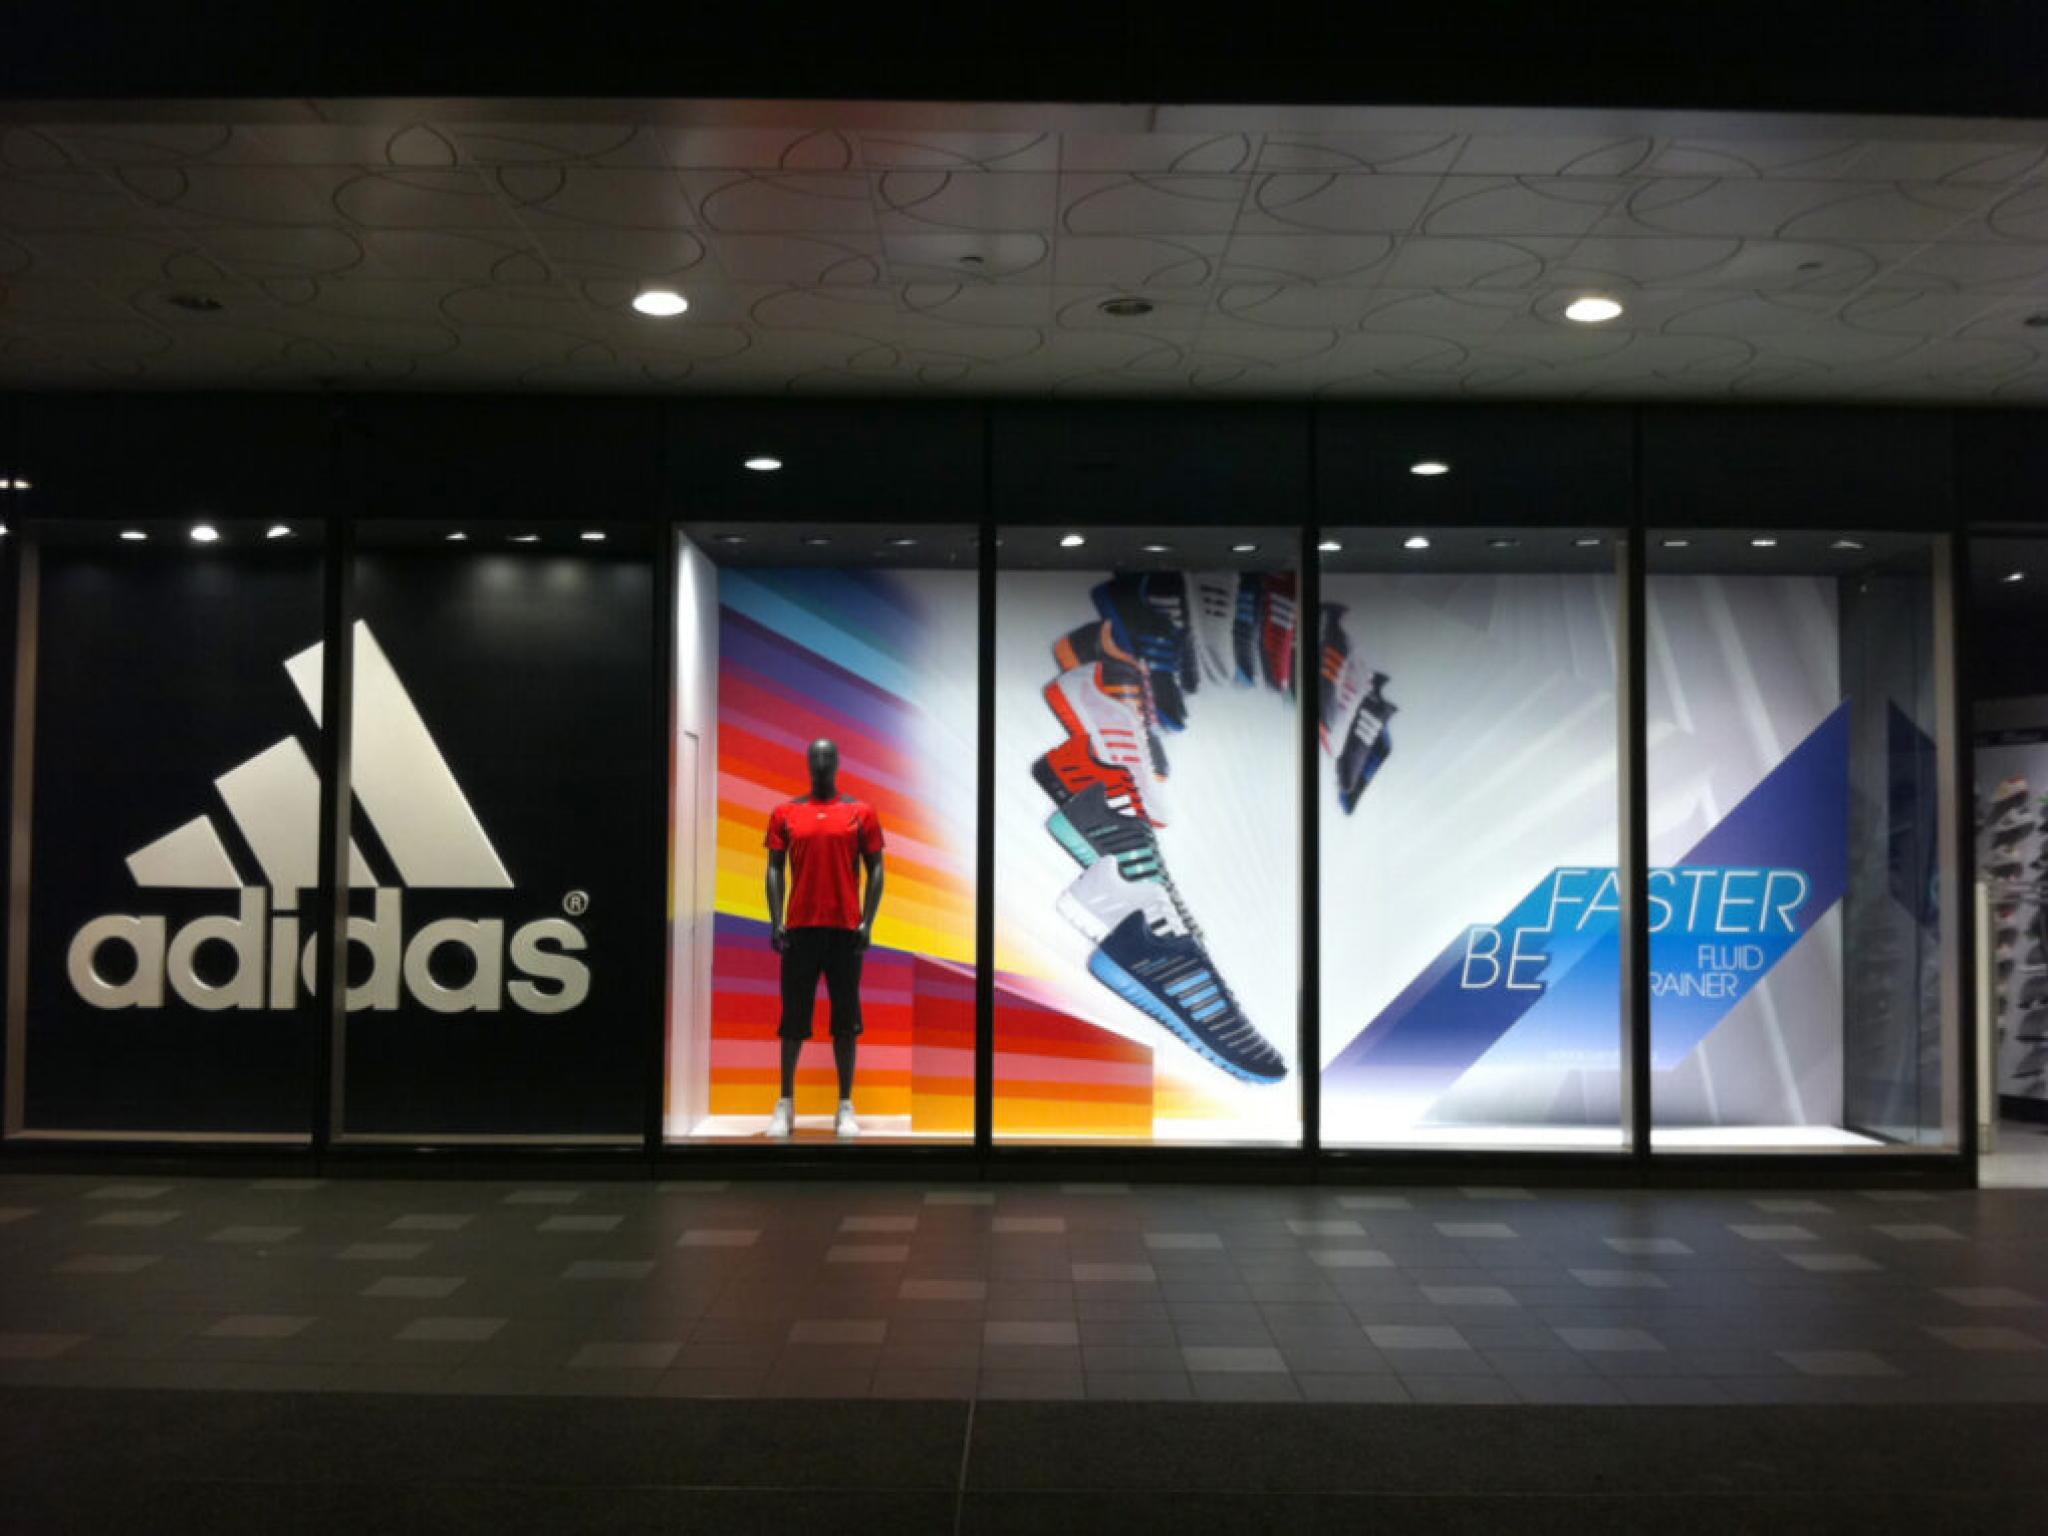  adidas-faces-bribery-allegations-in-china-launches-investigation-report 